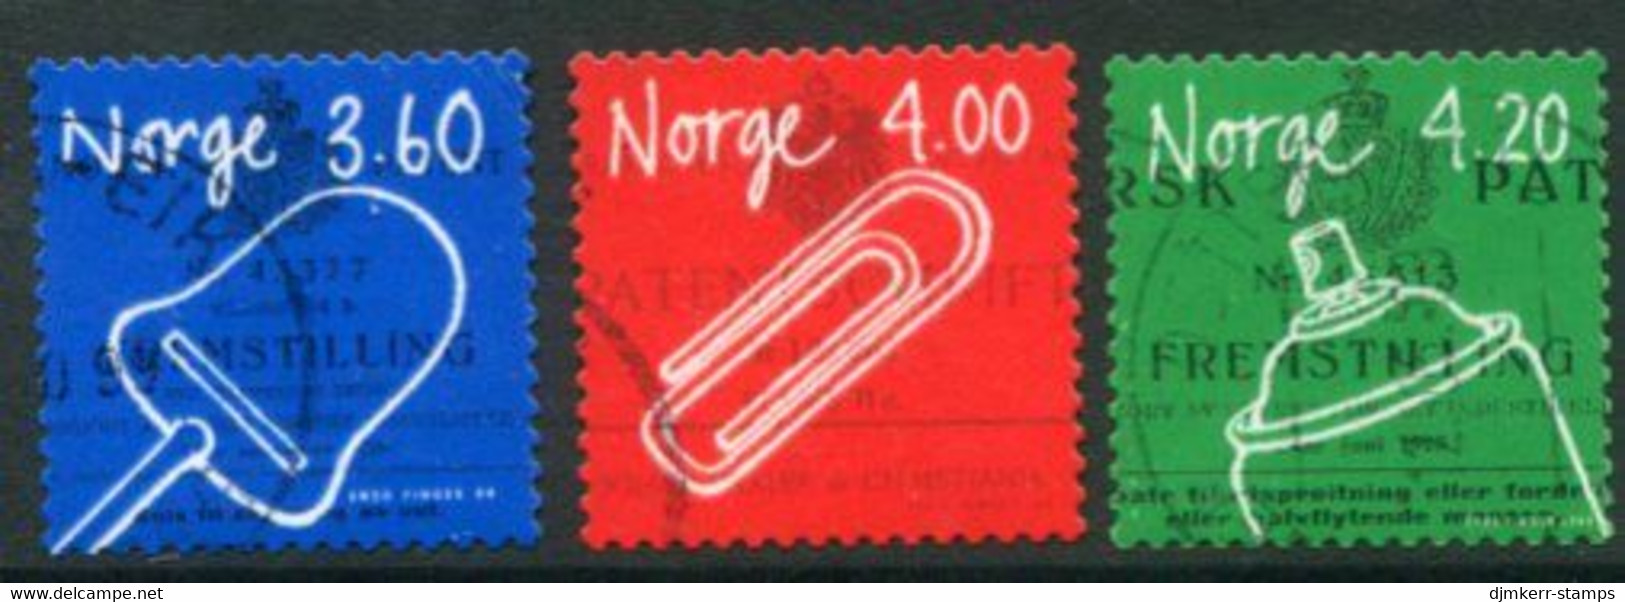 NORWAY 1999-2000 Inventions Used.   Michel 1299-1300 1354 - Used Stamps